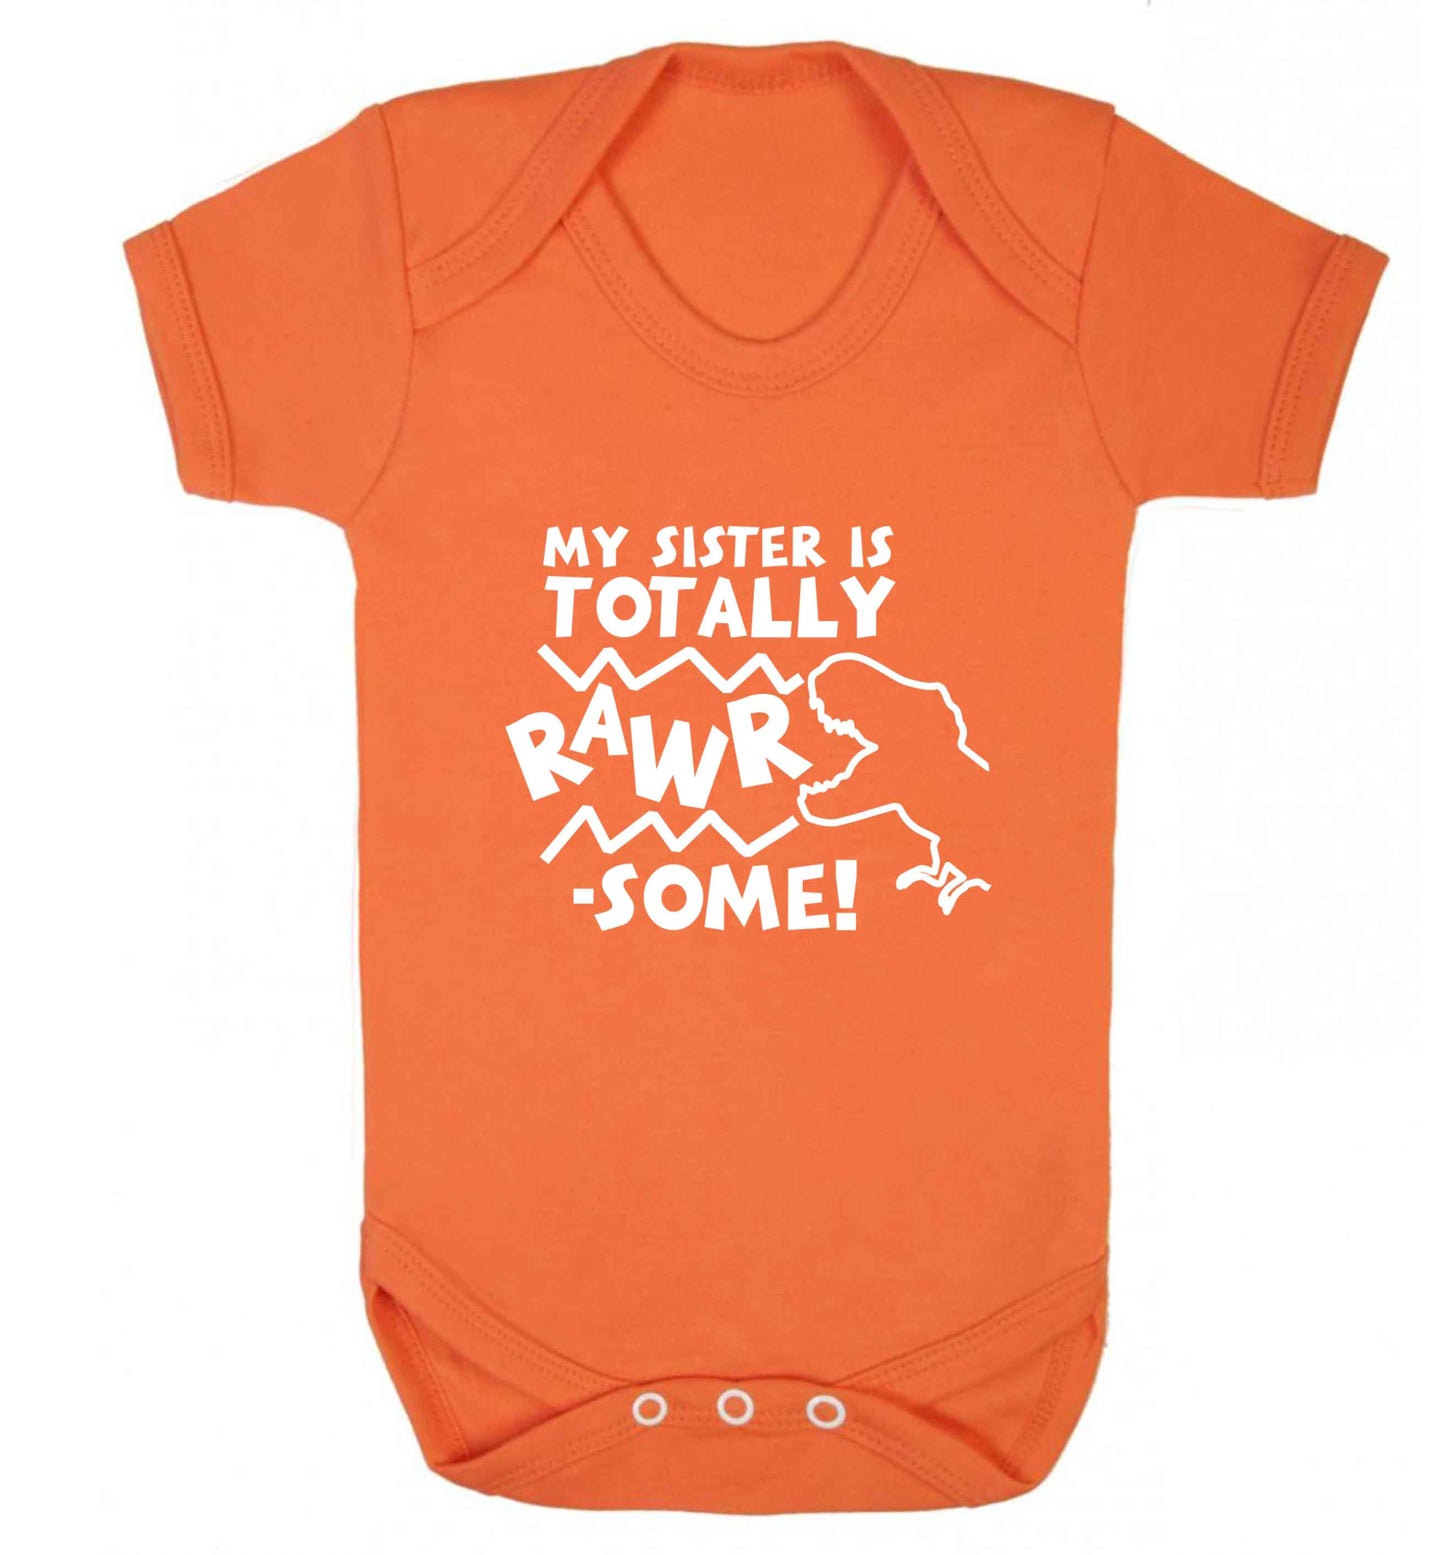 My sister is totally rawrsome baby vest orange 18-24 months